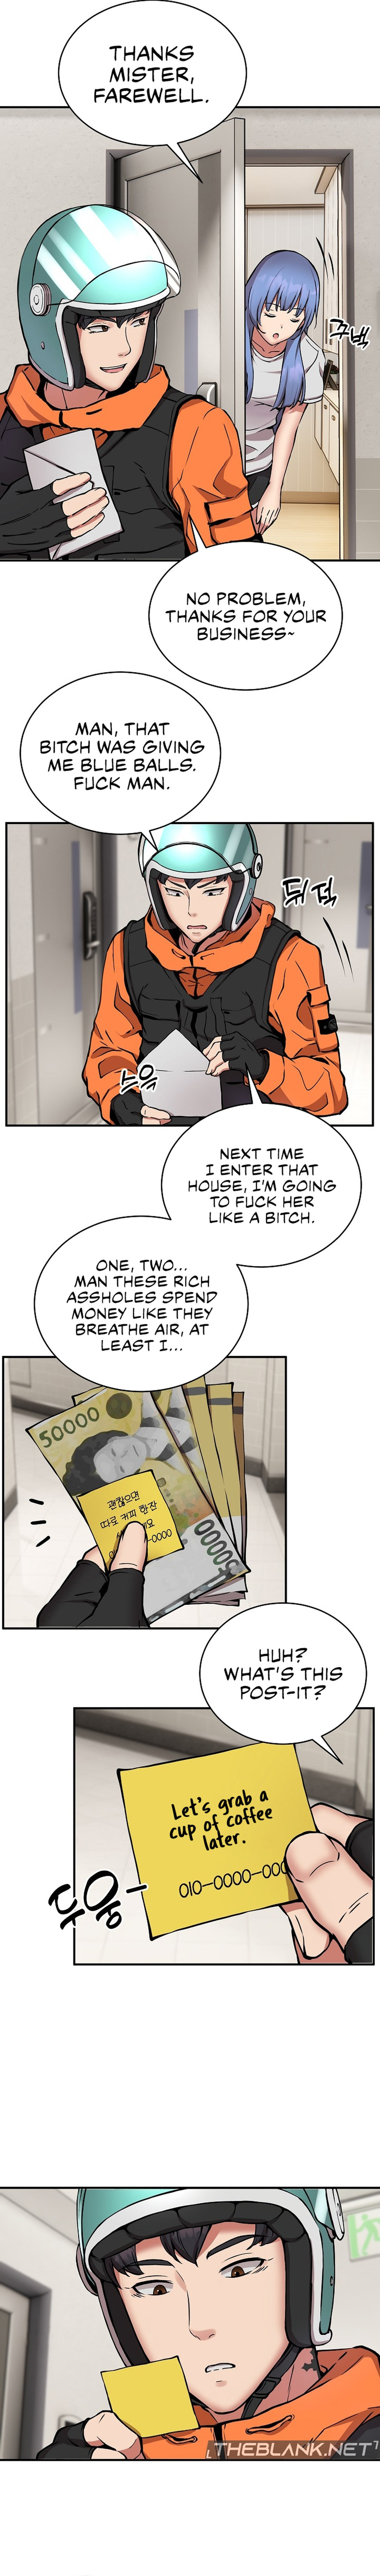 Driver in the New City - Chapter 12 Page 12